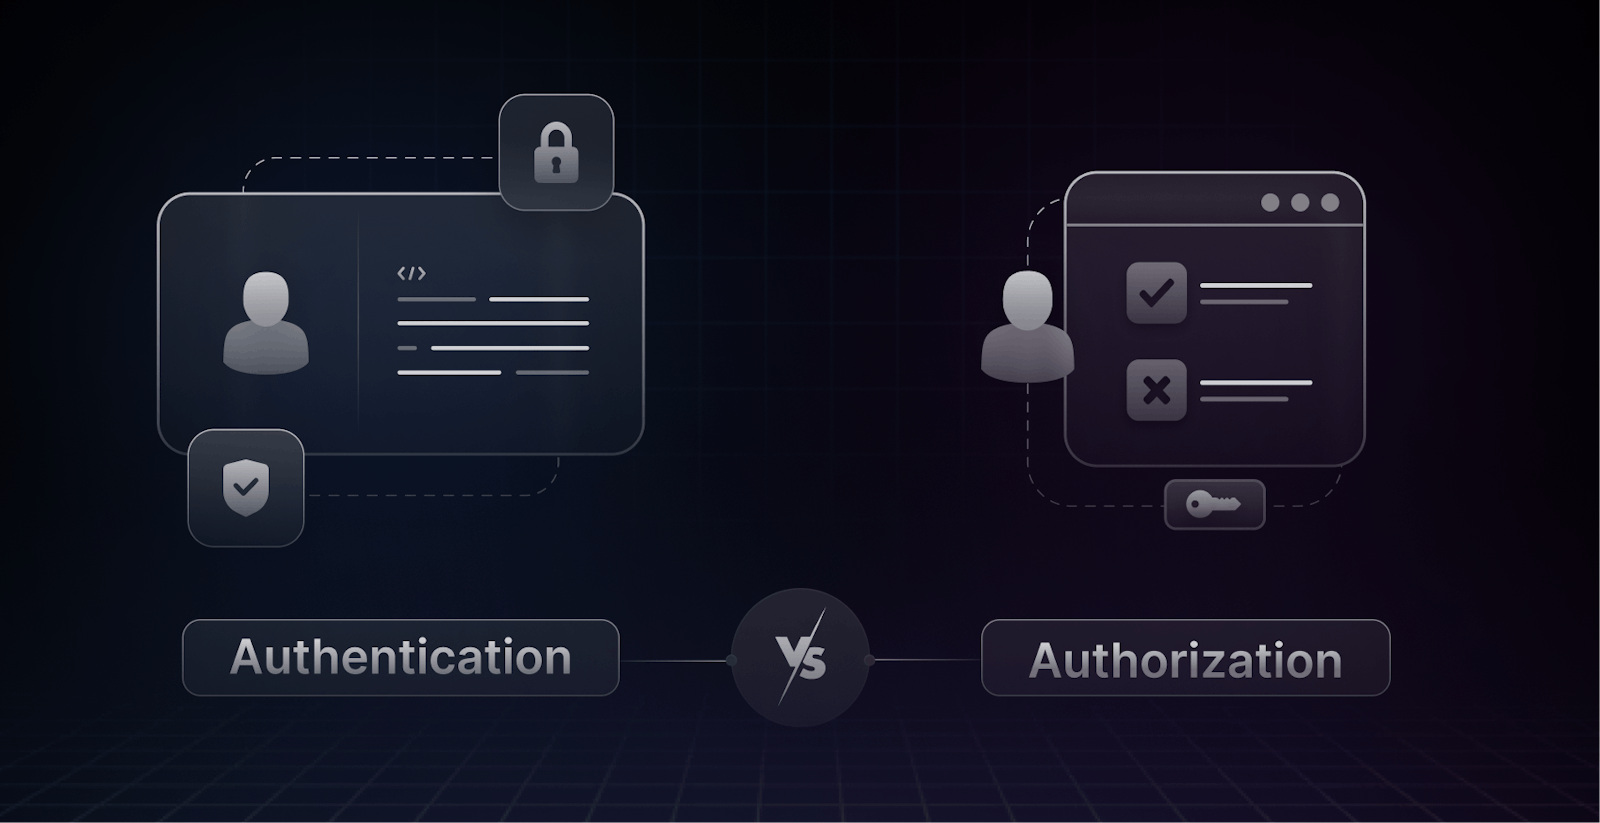 Authentication vs Authorization: What's the difference?